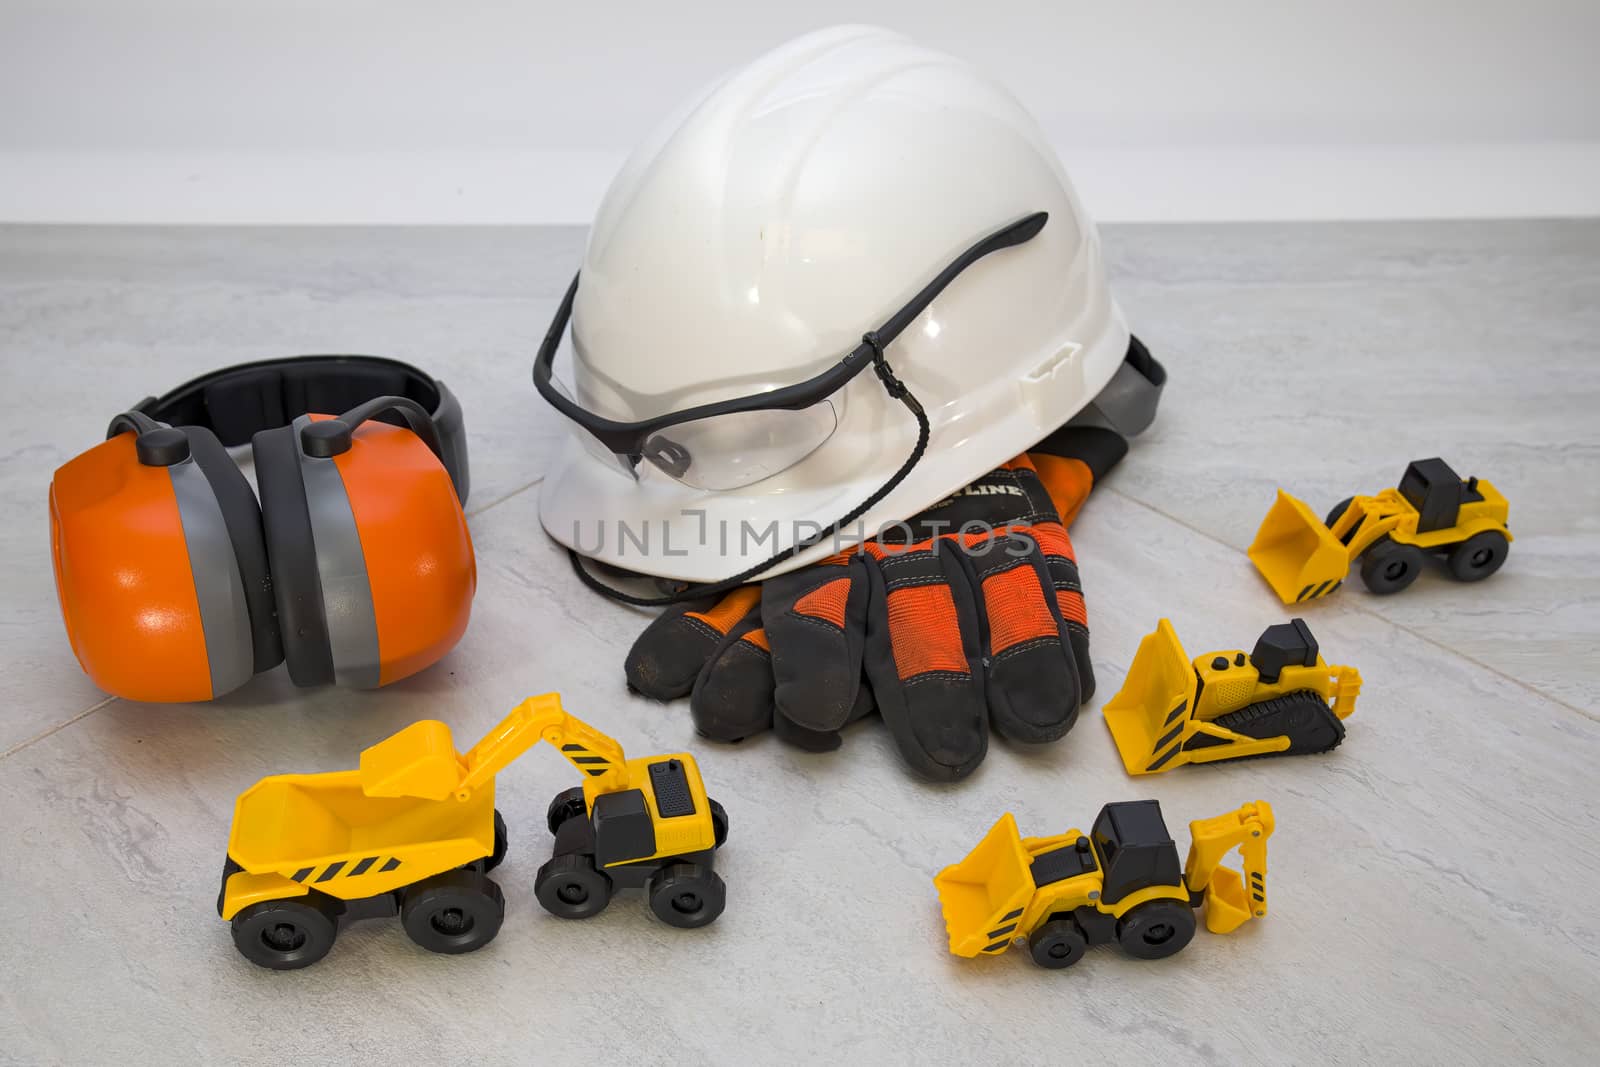 Dress up props for children playing construction worker.